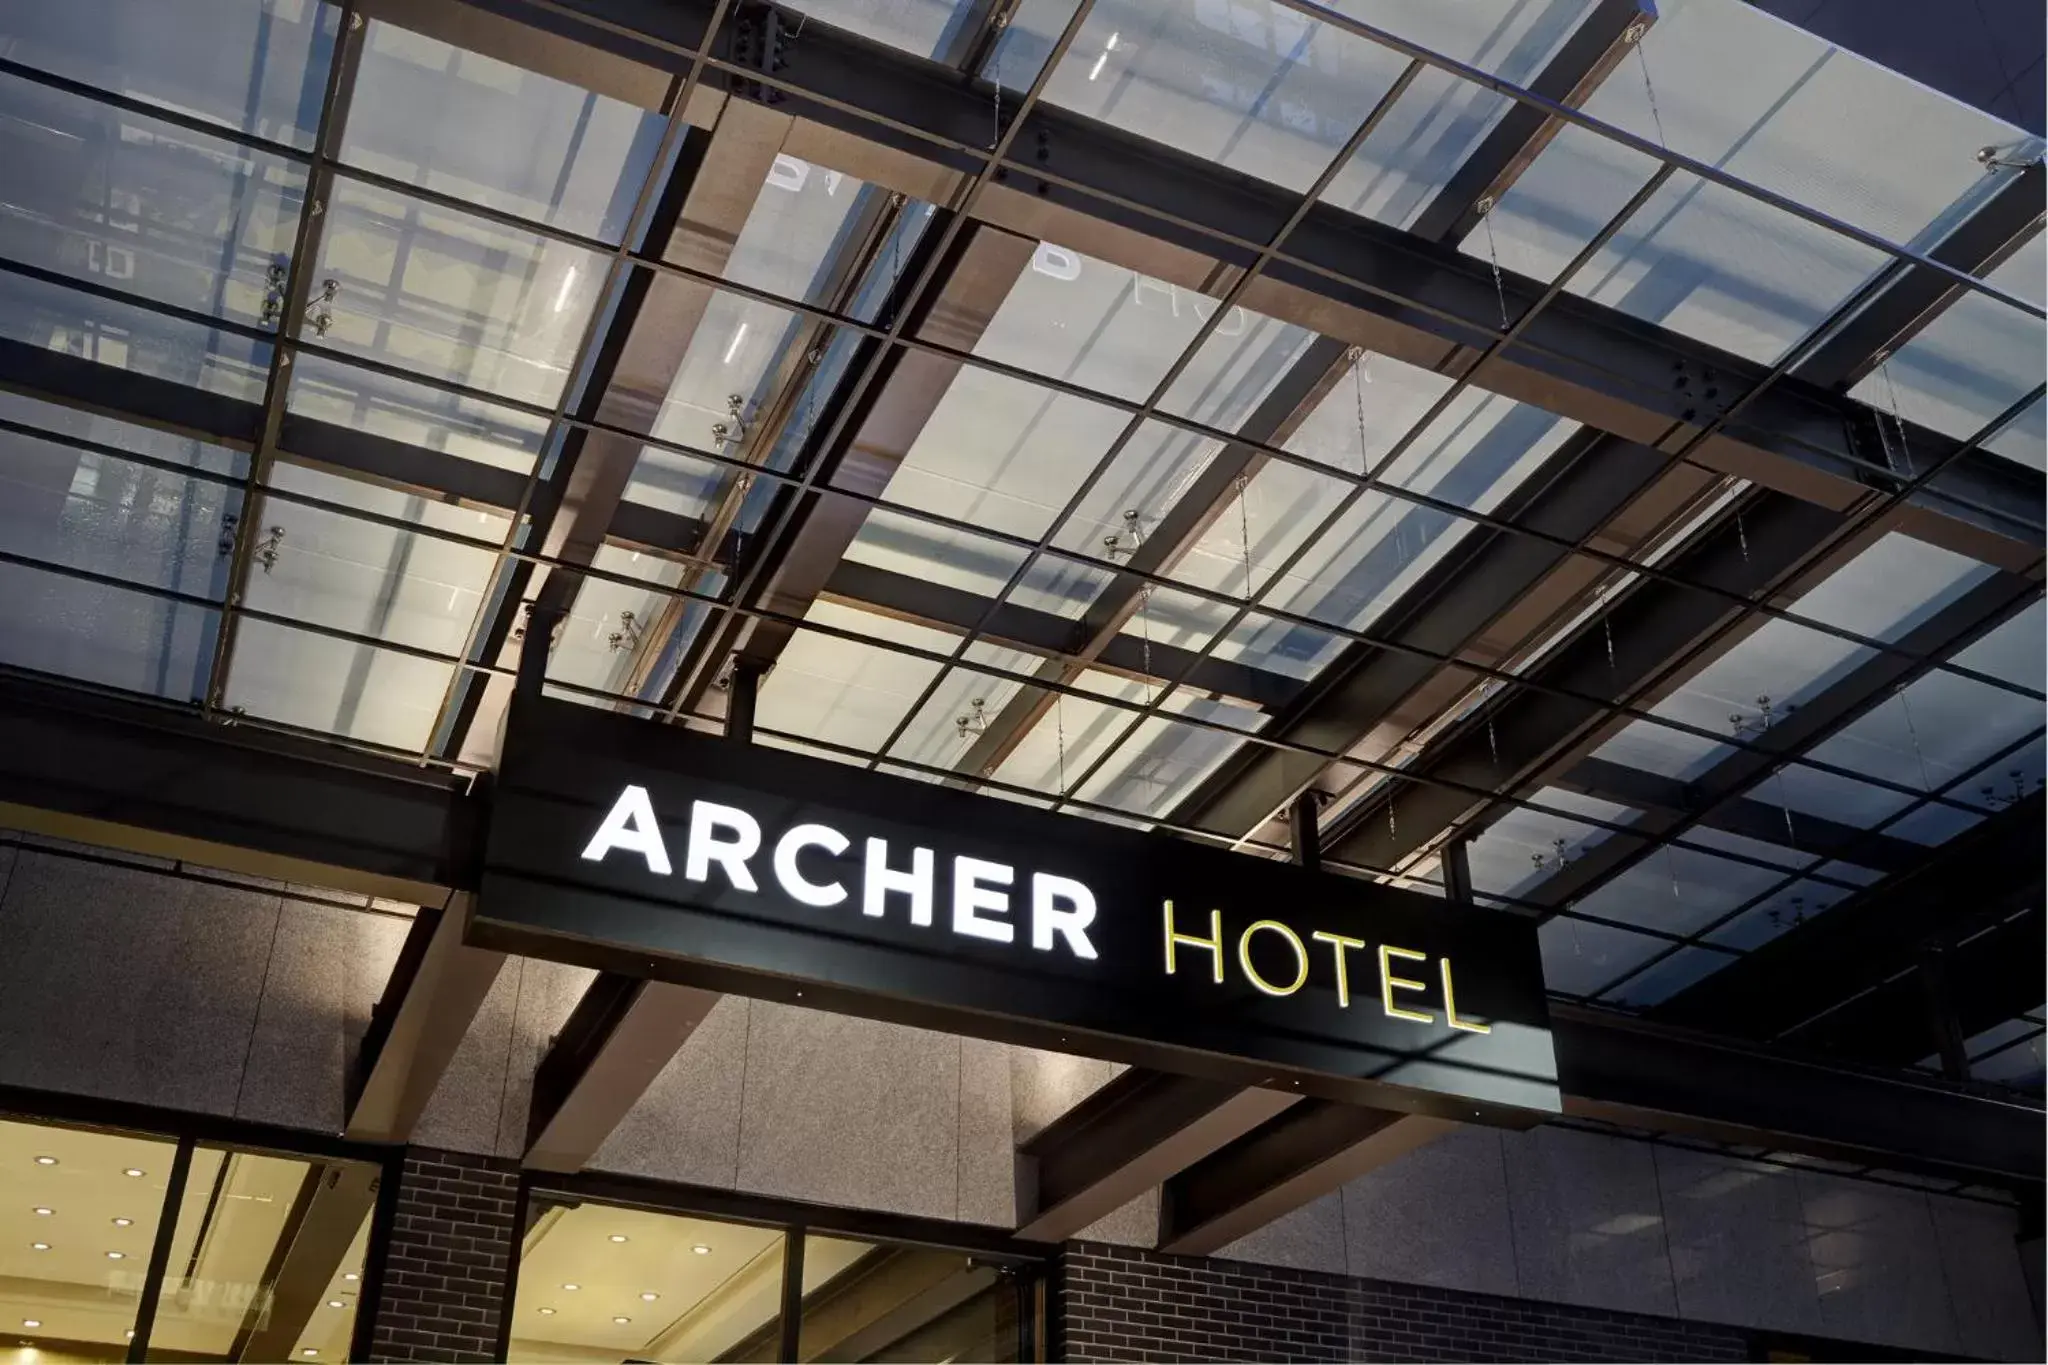 Property building in Archer Hotel New York